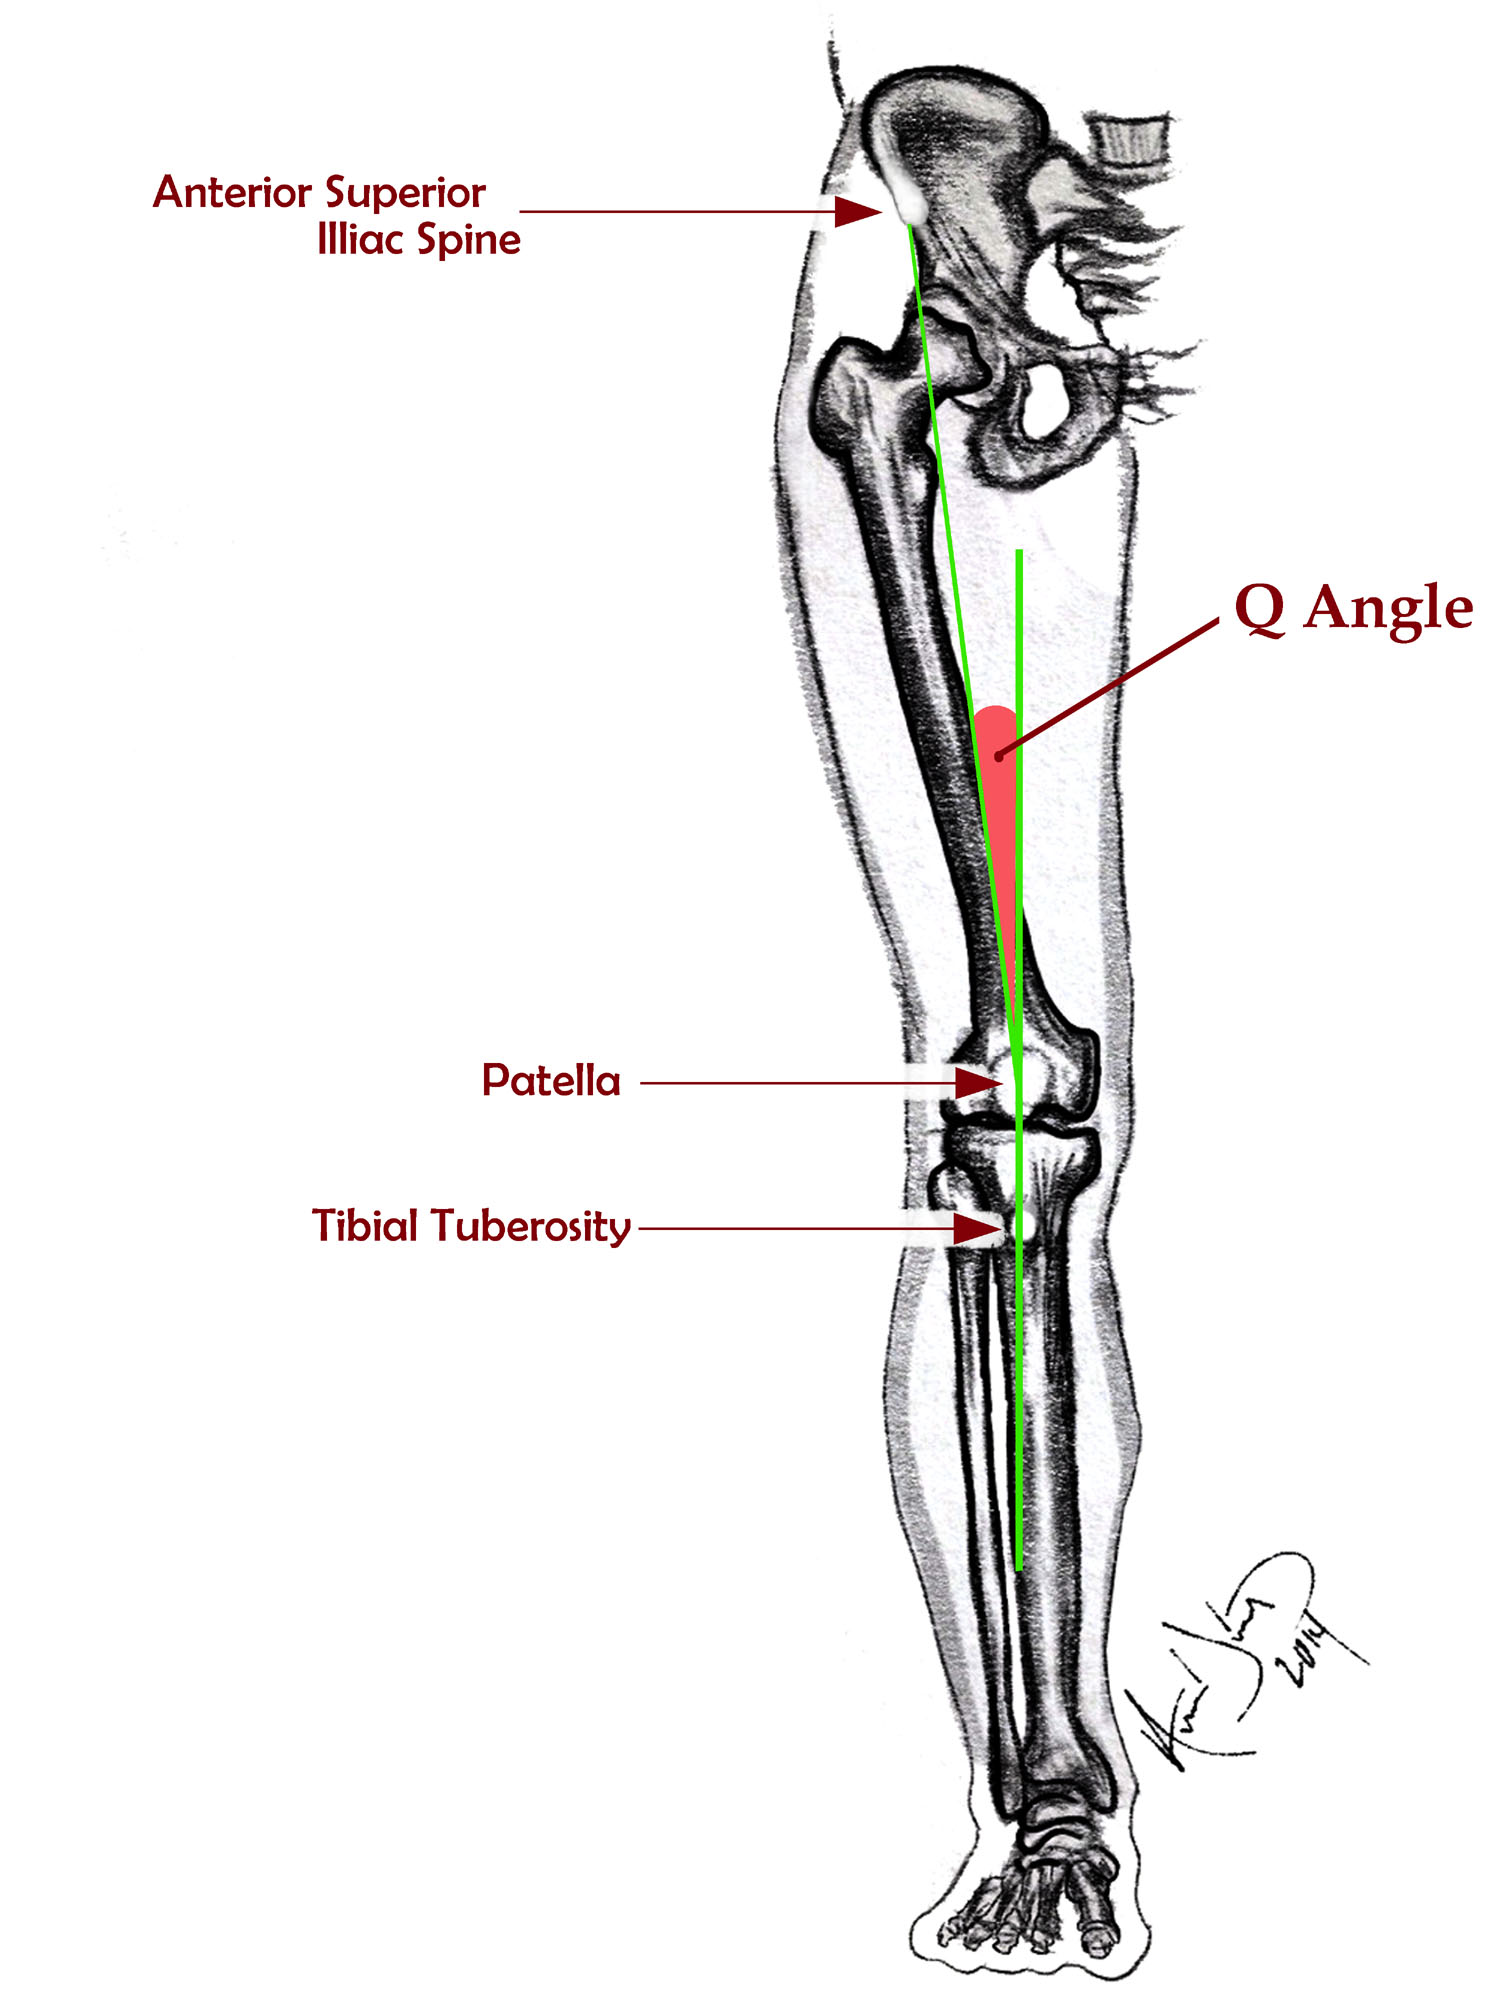 Figure 3.  The Q angle (quadriceps angle) is the angle formed by the intersection of two lines: the line from the middle of the patella to the anterior superior iliac spine (ASIS) and a line from the tibial tubercle through the middle of the tubercle. 